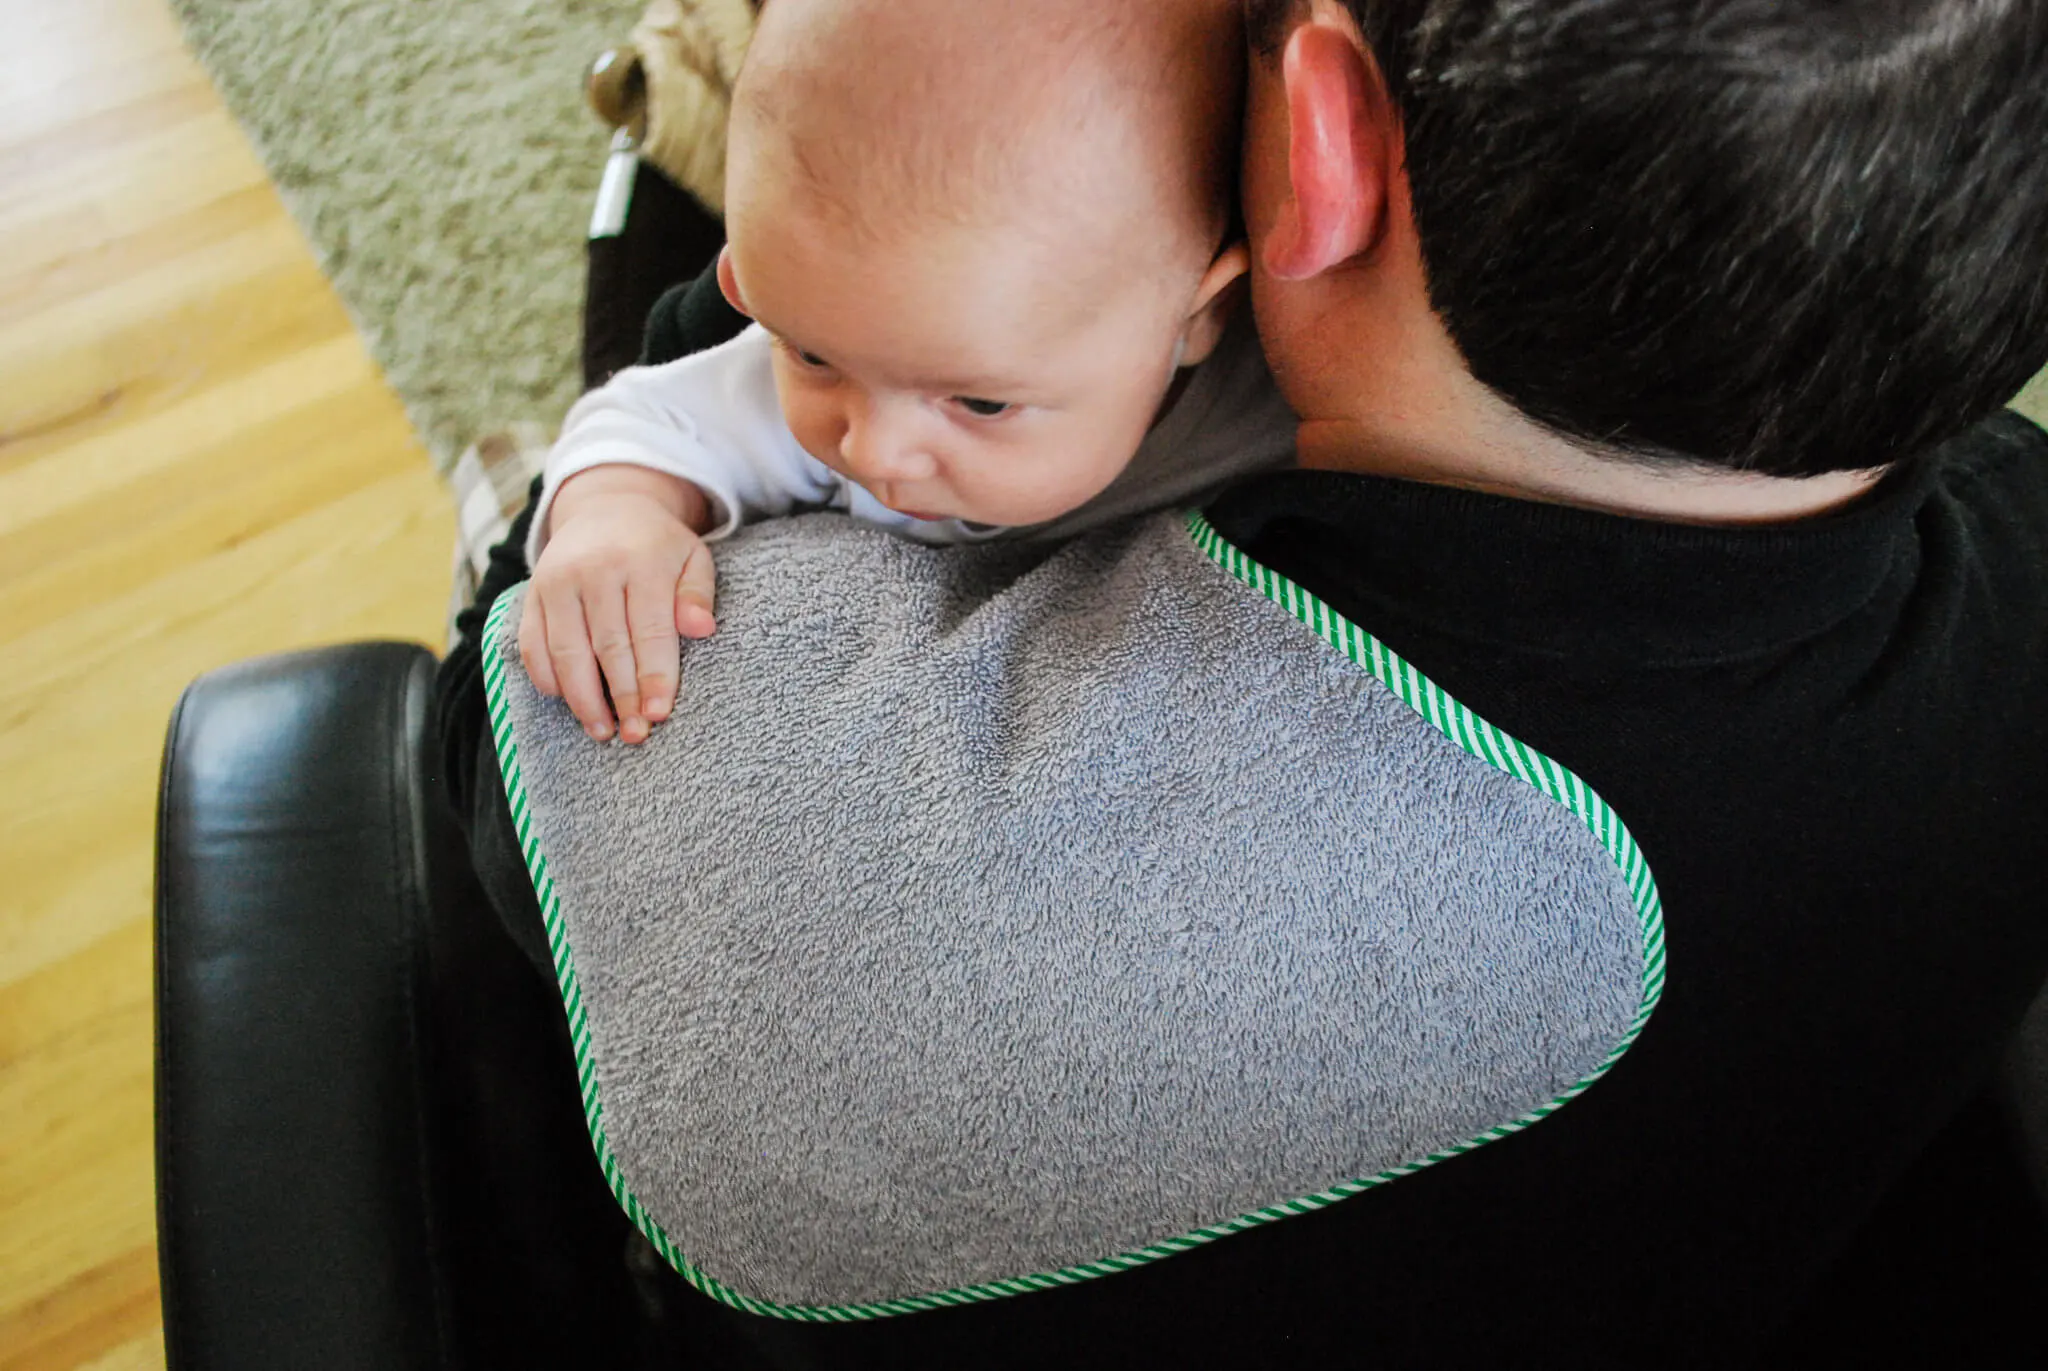 Easy DIY curved baby burp cloth free sewing pattern